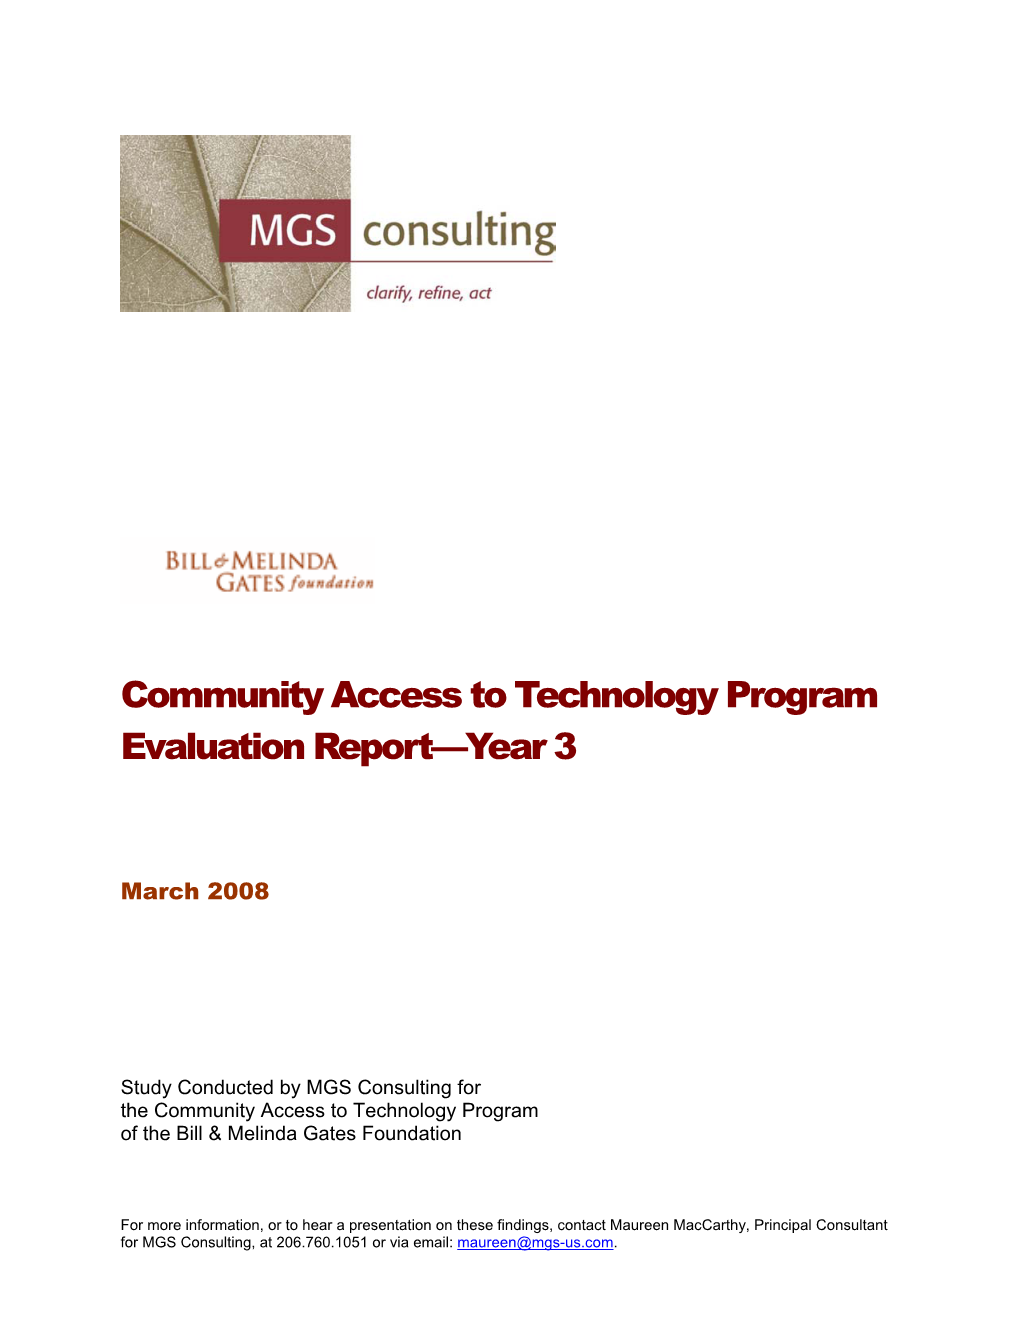 Community Access to Technology Program Evaluation Report—Year 3